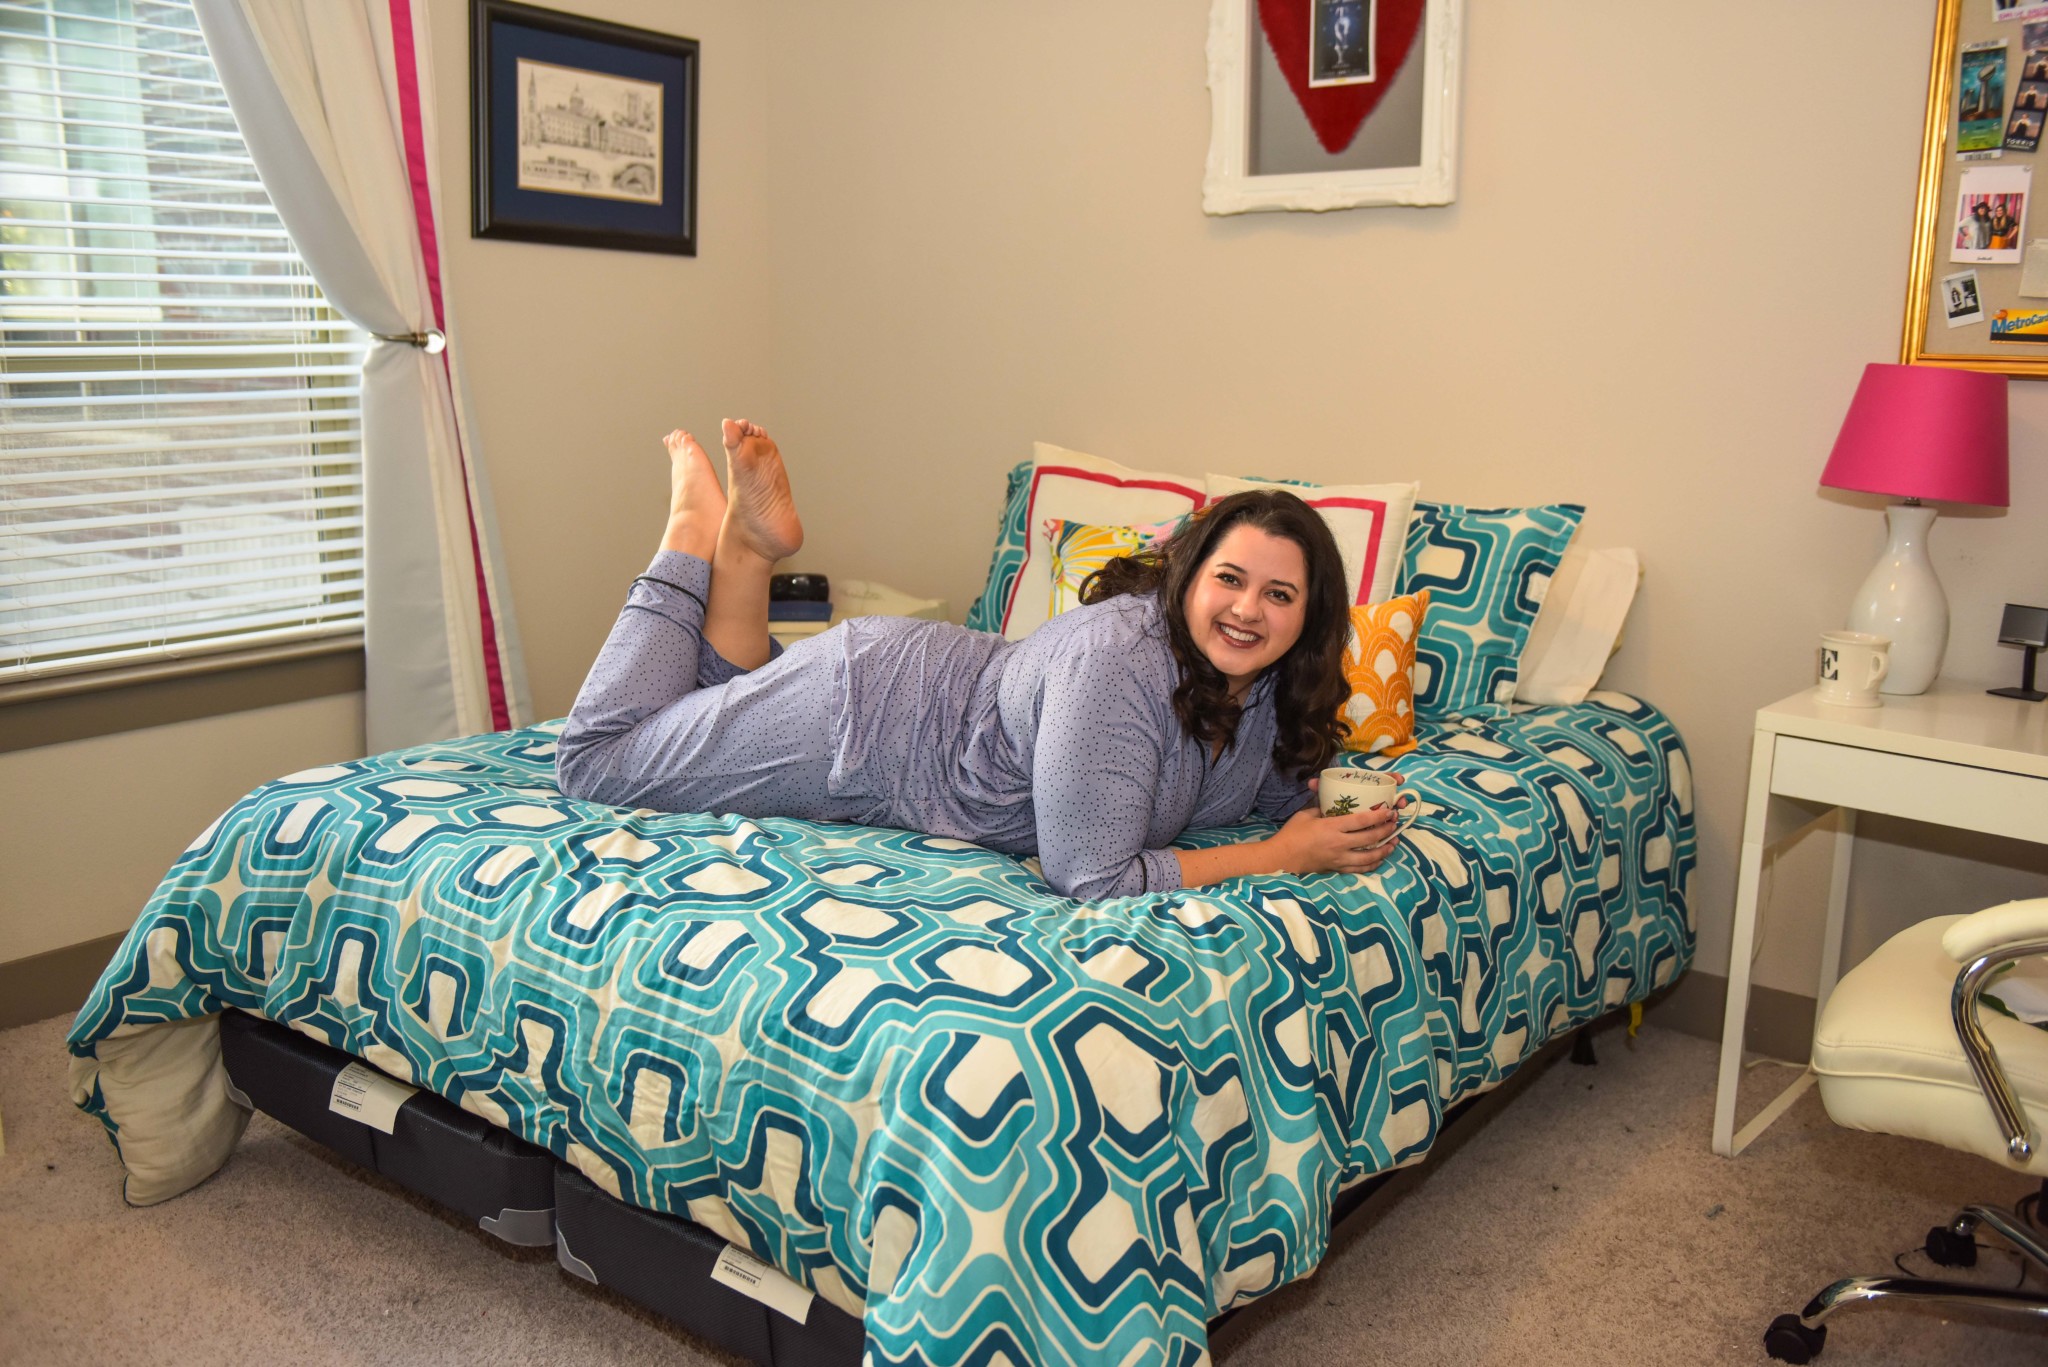 Big Fig mattress made specifically for those with bigger figures